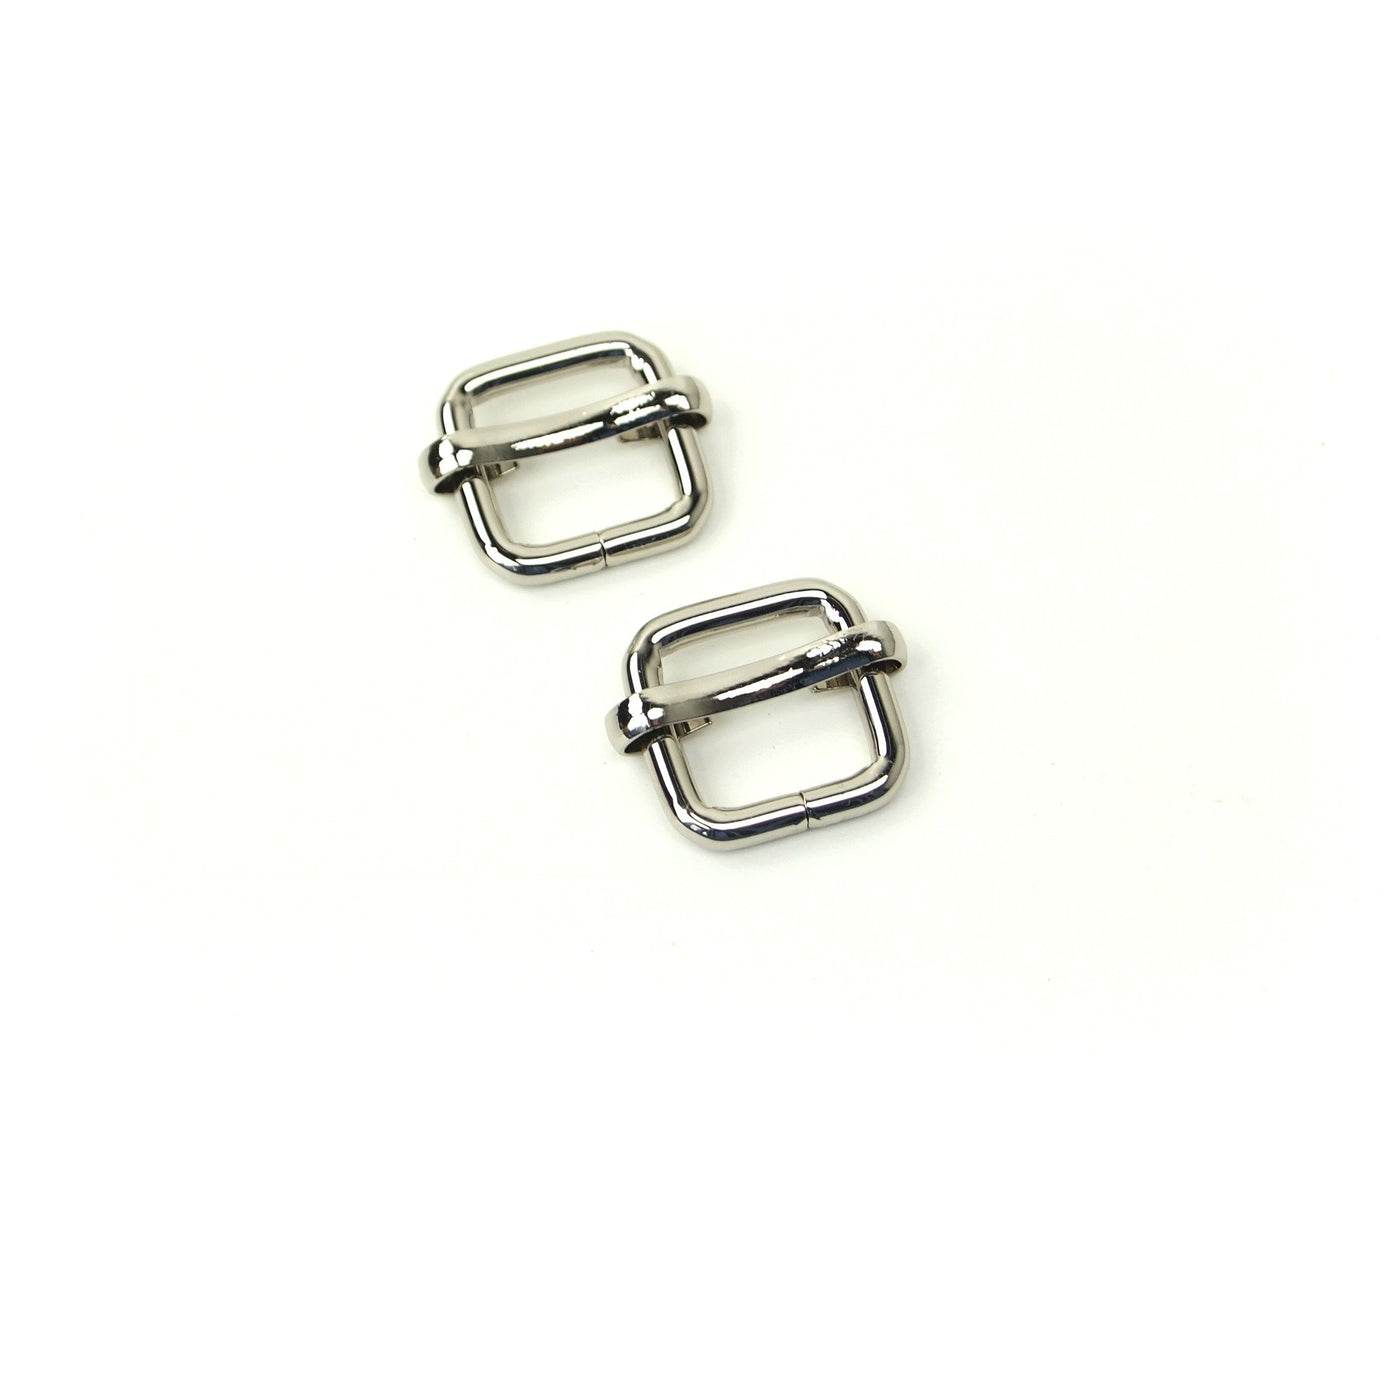 Two Slider Buckles 1/2"